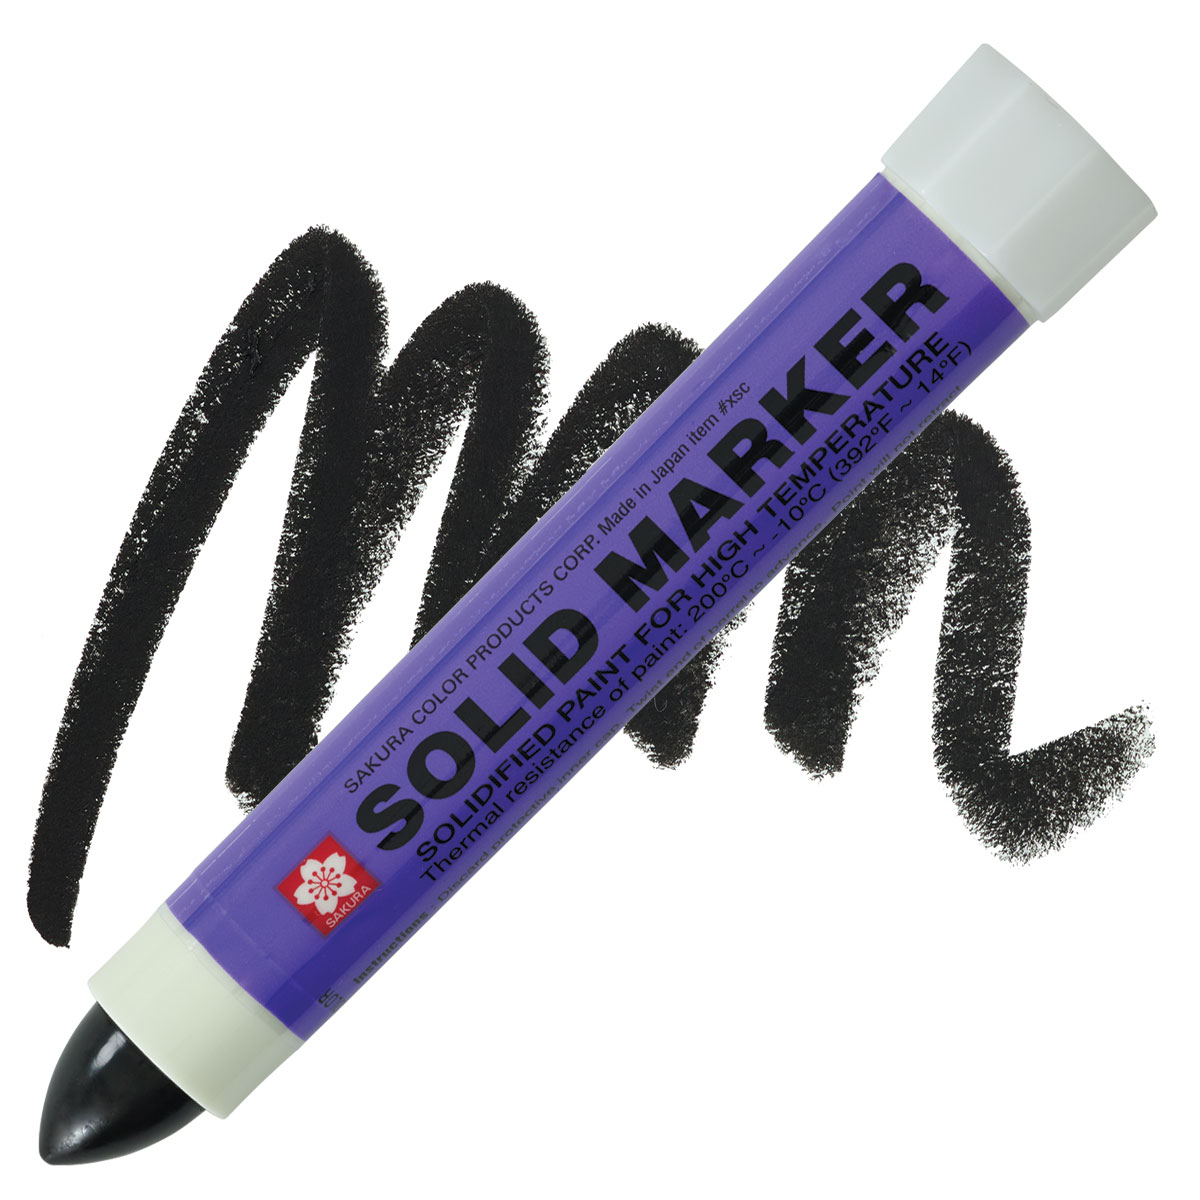 Solidified Paint Solid Marker Black 